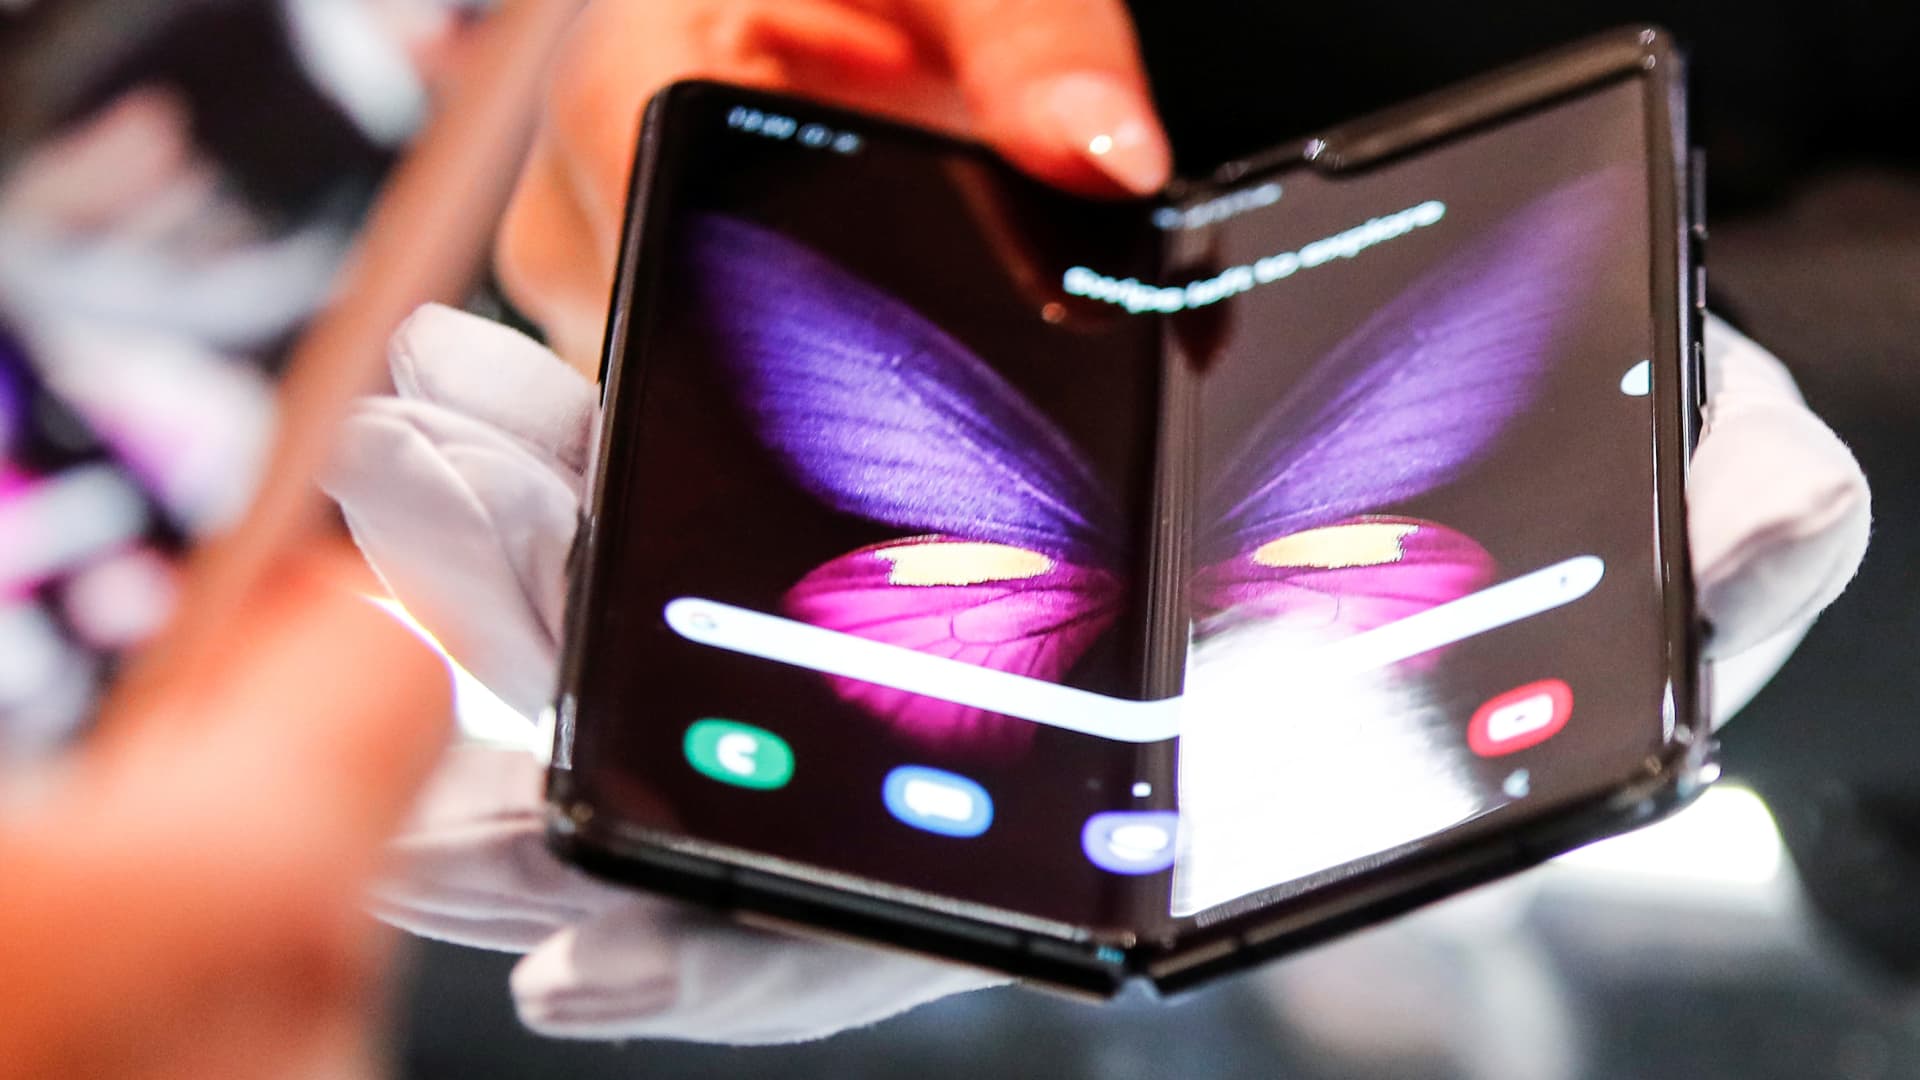 Apple folding phone could come soon after Samsung Galaxy Z Fold